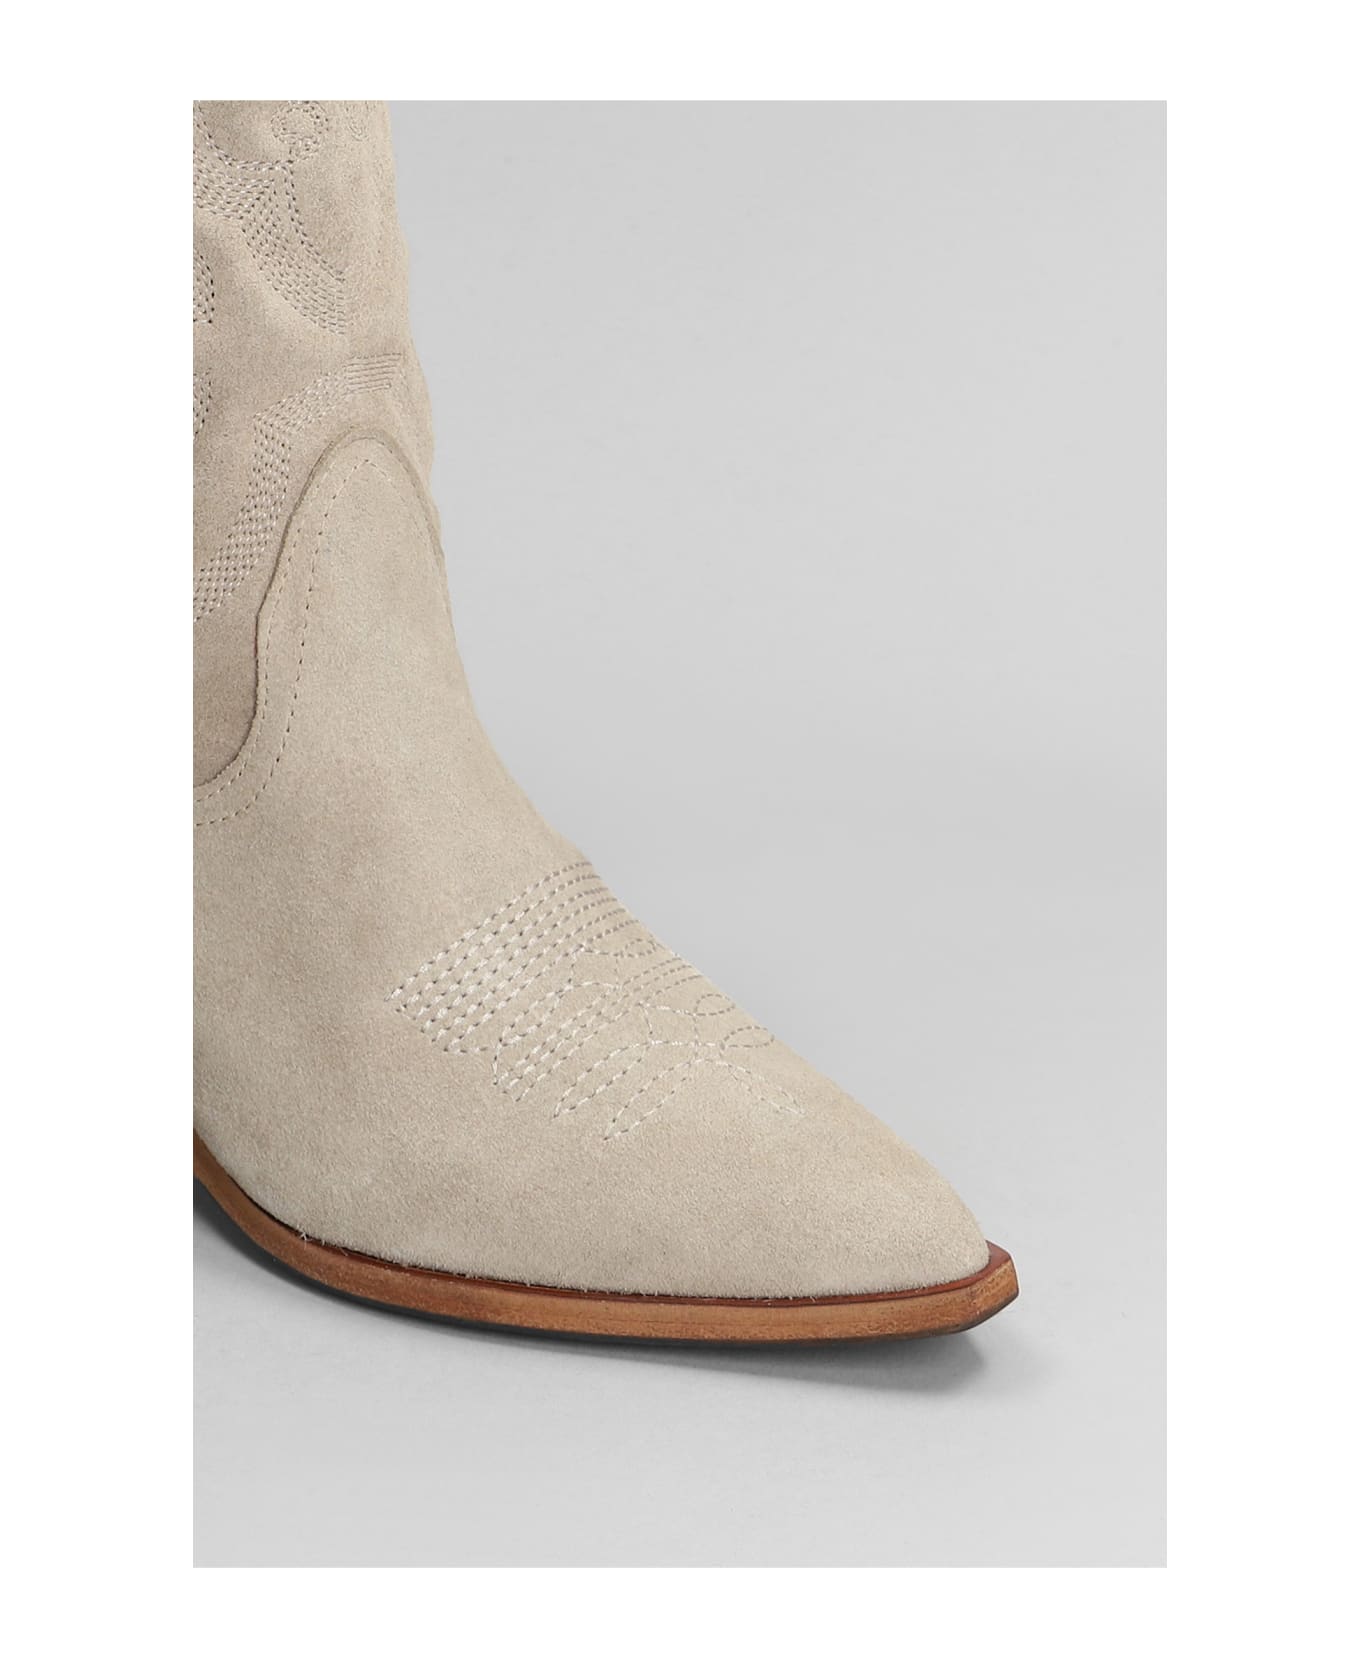 Julie Dee Texan Boots In Taupe Suede - taupe